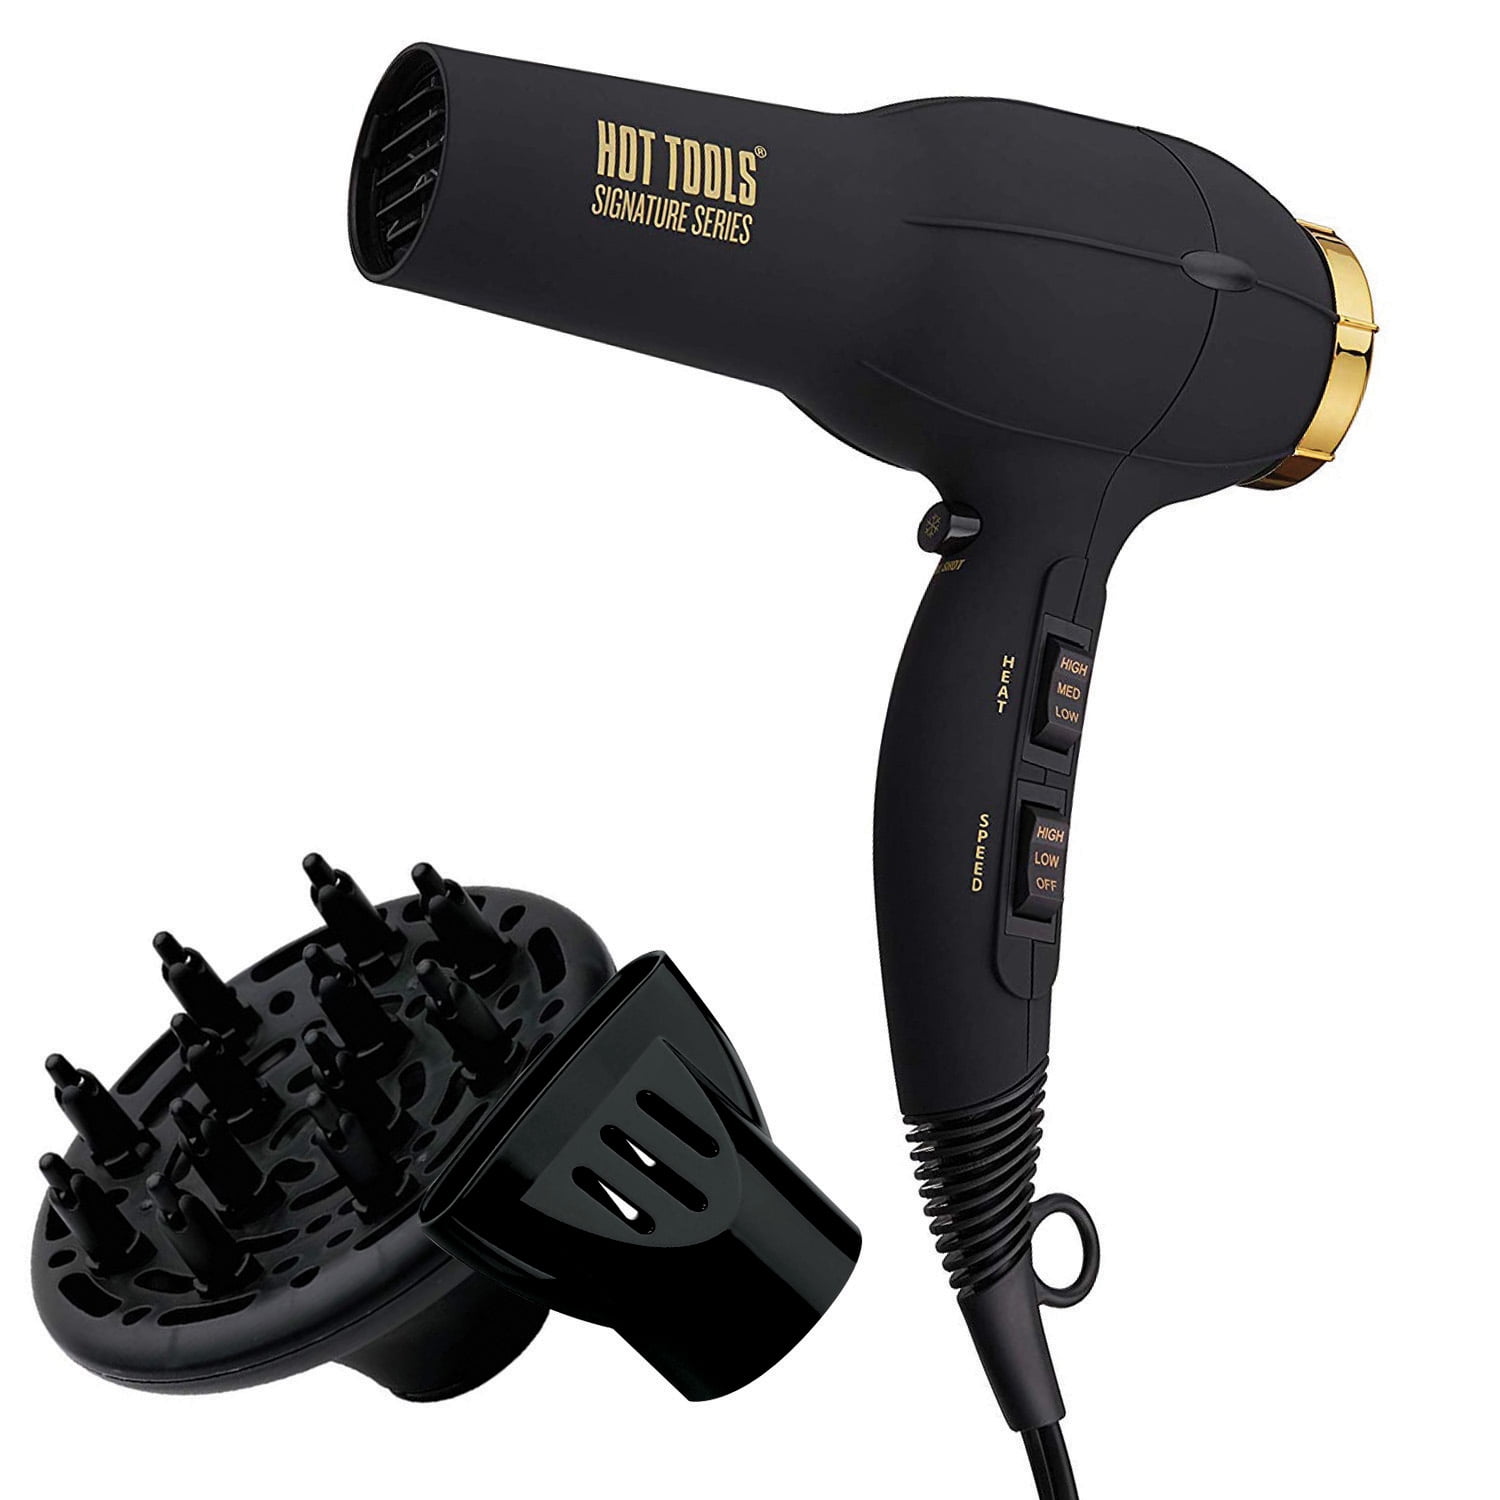 Hot Tools Signature Series Ionic Turbo Hair Dryers, Black with